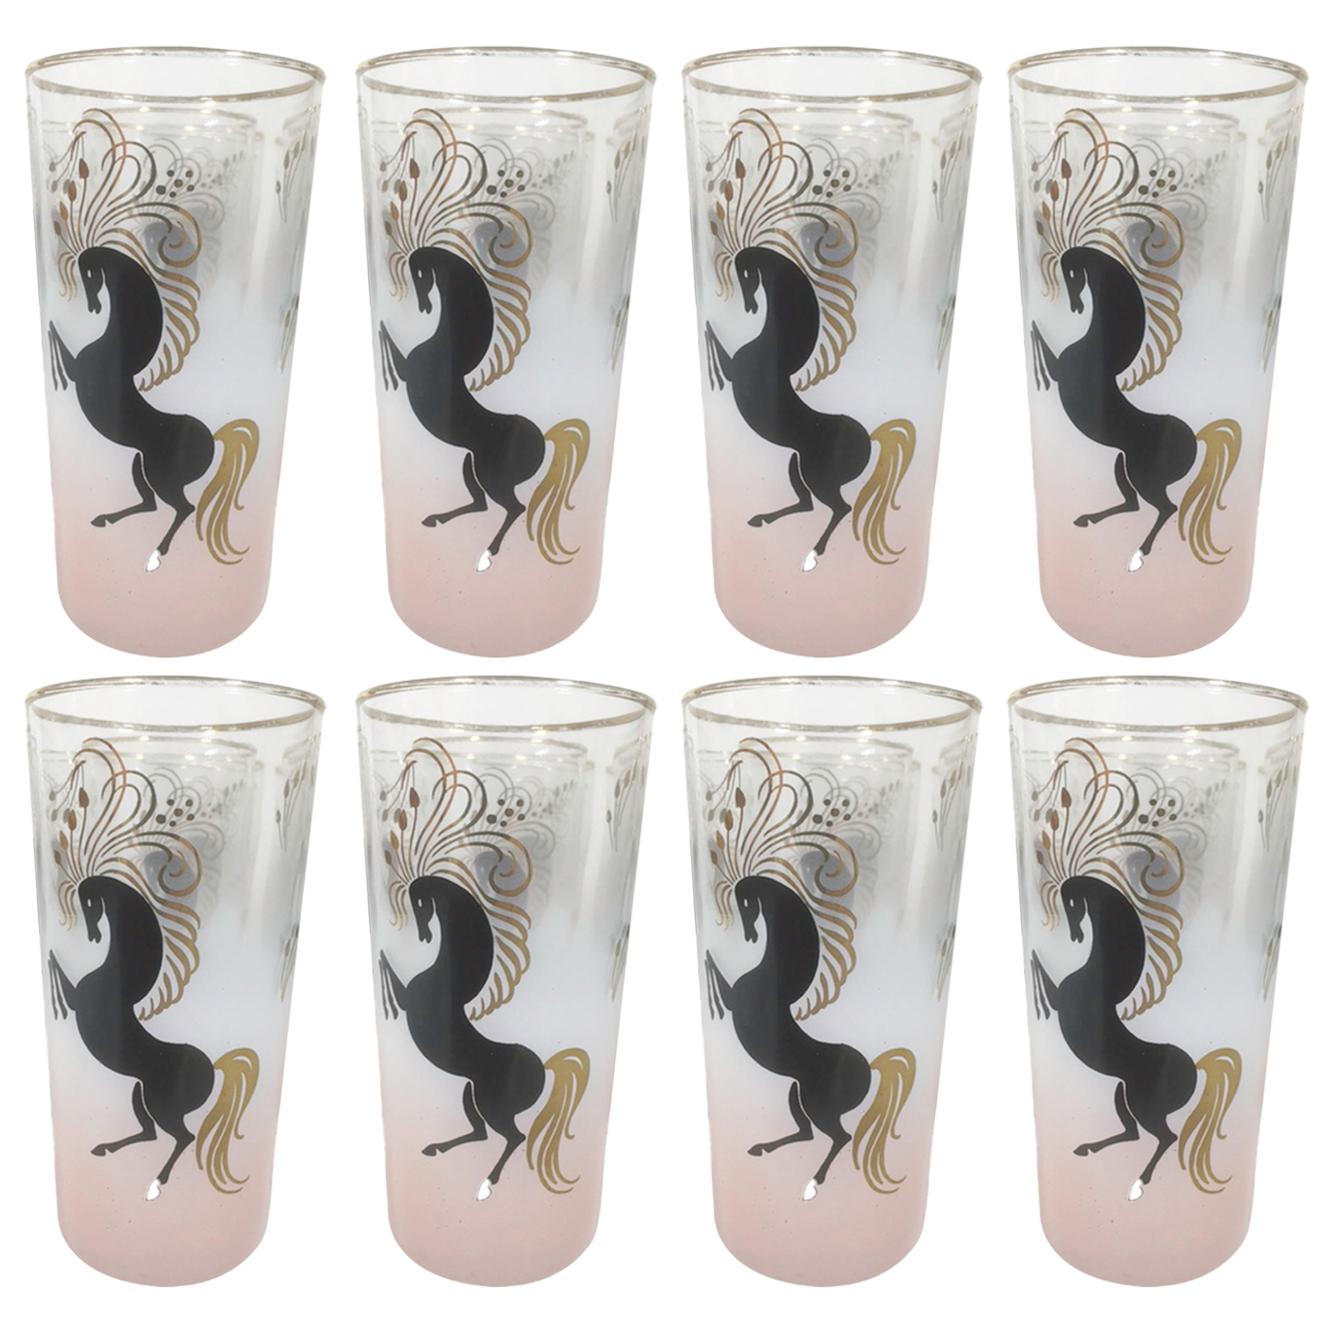 Vintage Libbey Highball Glasses, Black Stylized Horses on Pink Frosted Ground